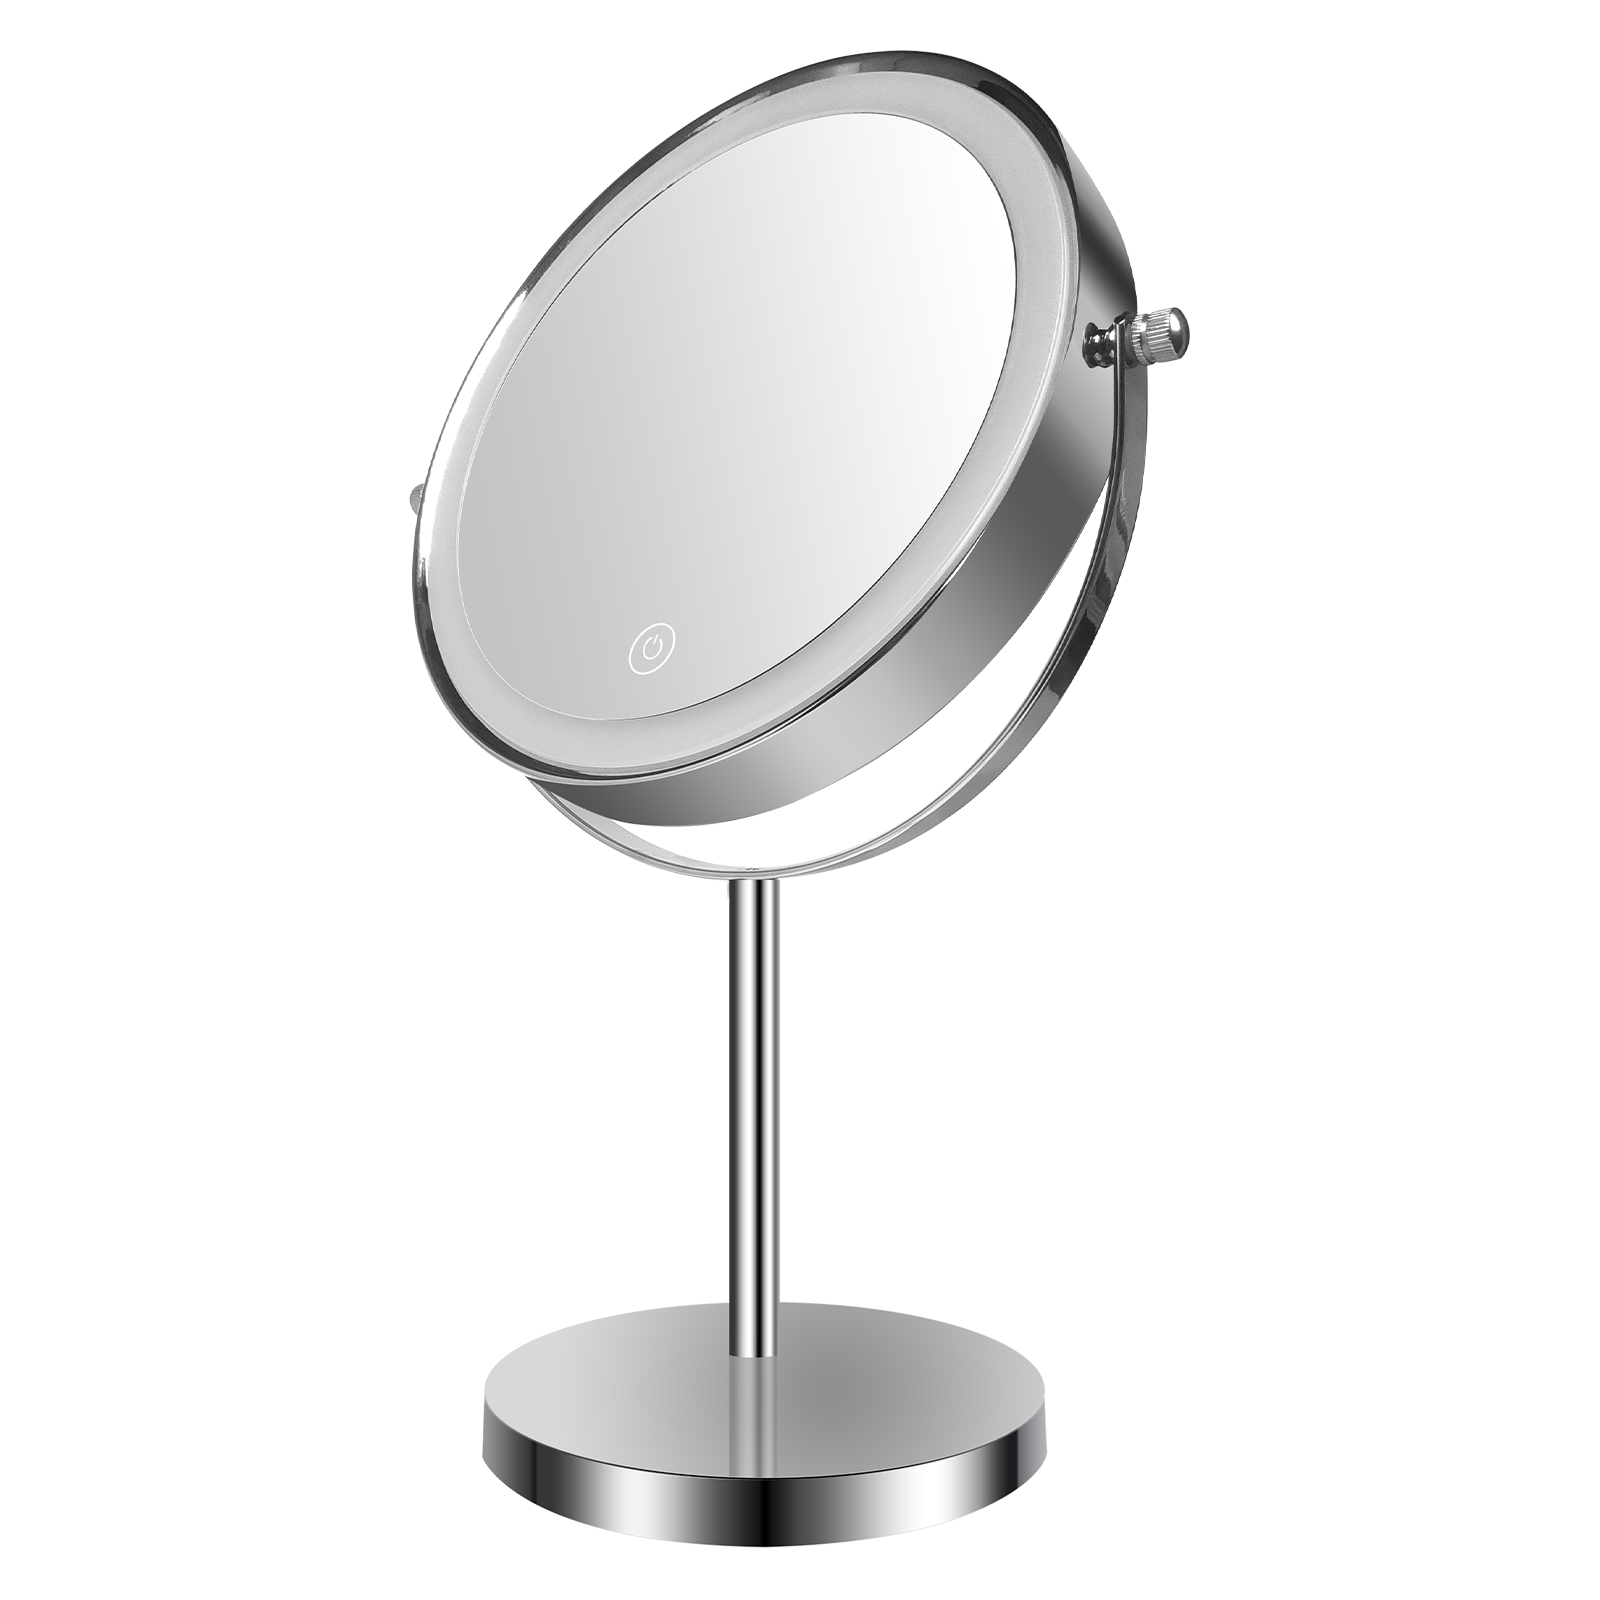 8 inch Makeup Mirror with Lights, Double Sided 1x